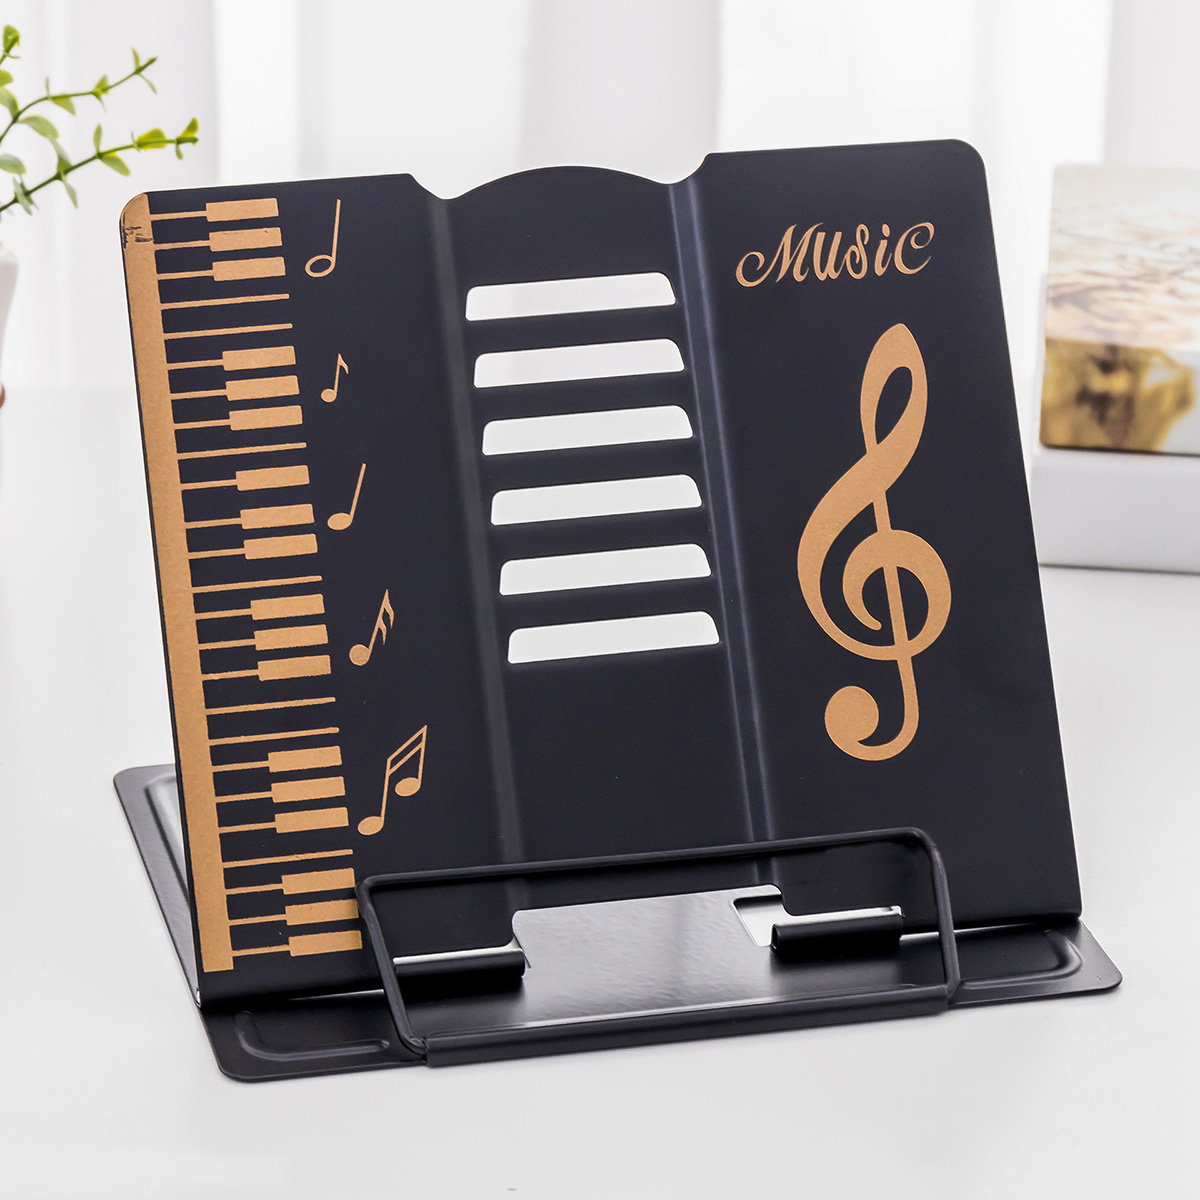 Metal-Adjustable-Music-Book-Pad-Holder-Stand-Music-Practice-Portable-Rack-Bookends-1564293-7